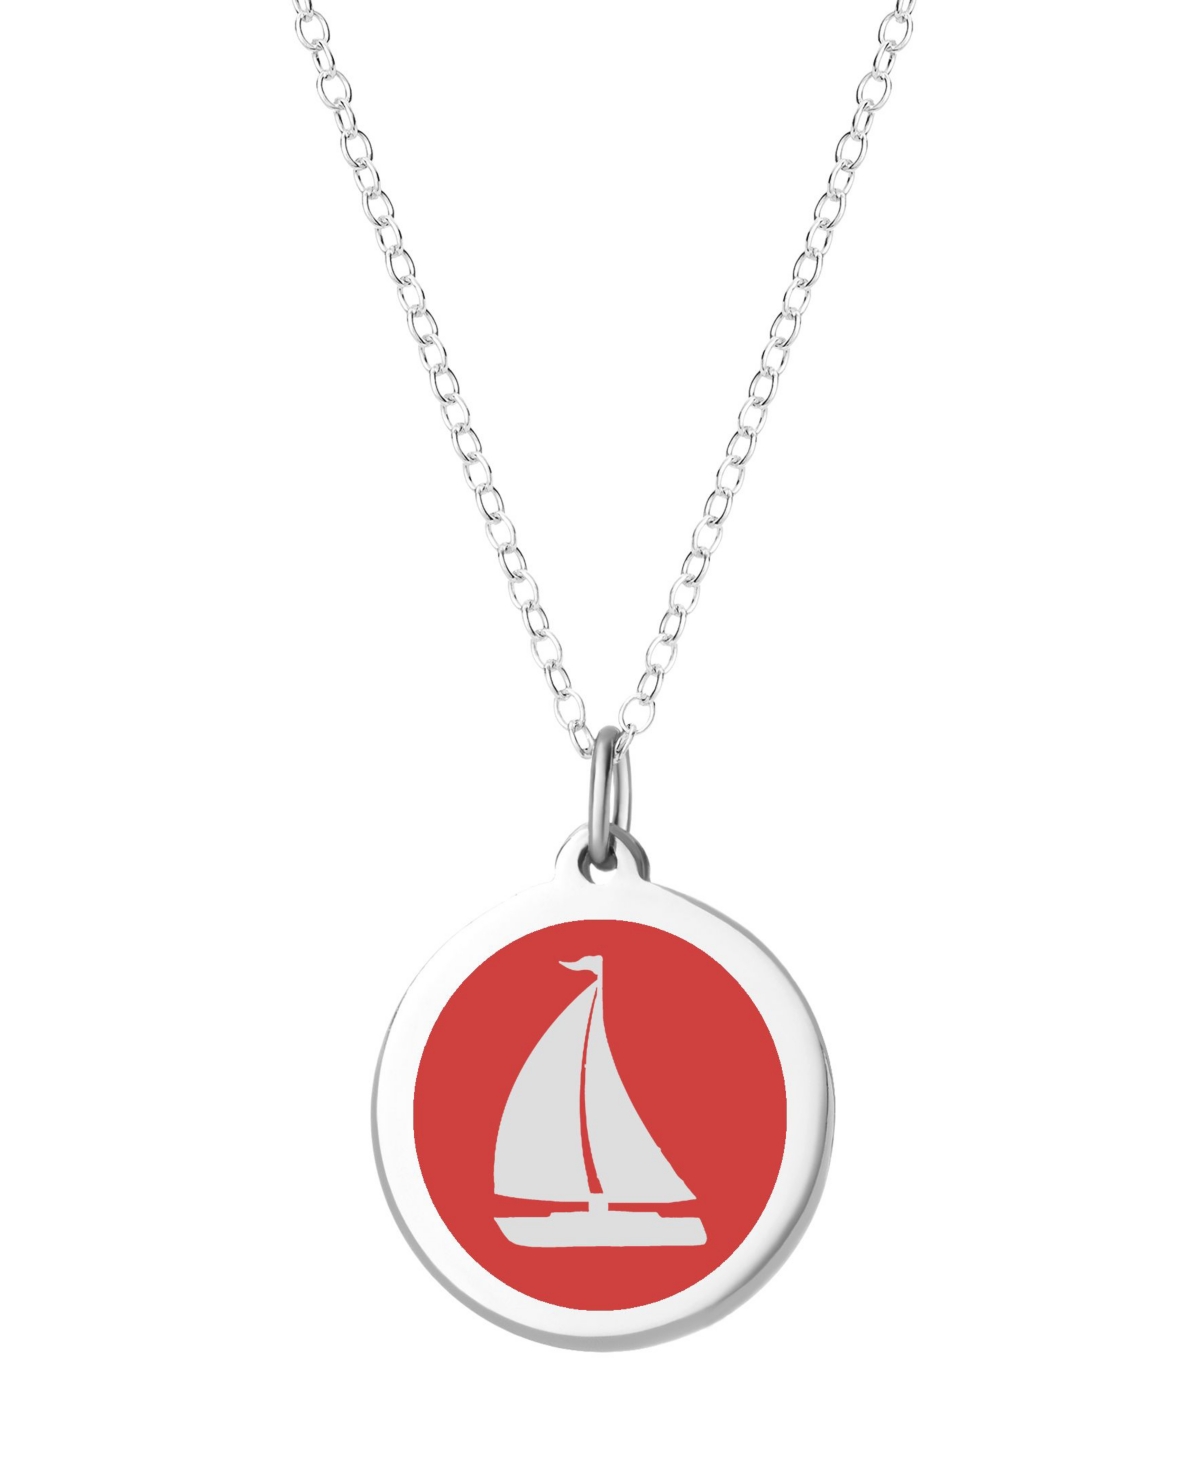 Sailboat Pendant Necklace in Sterling Silver and Enamel, 16" + 2" Extender - Red